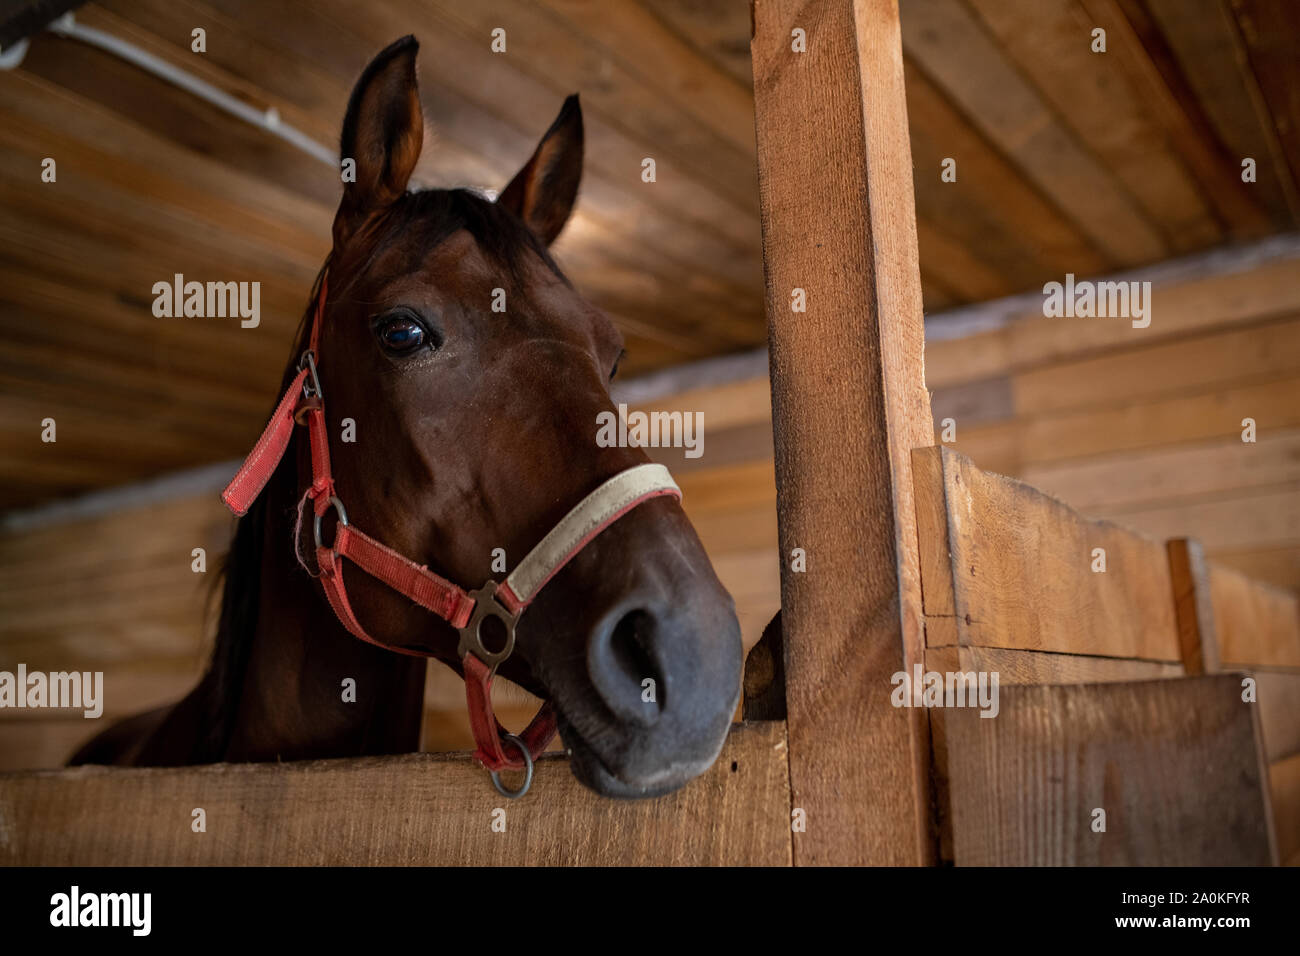 Head of young brown purebred racehorse standing in front of camera inside barn Stock Photo